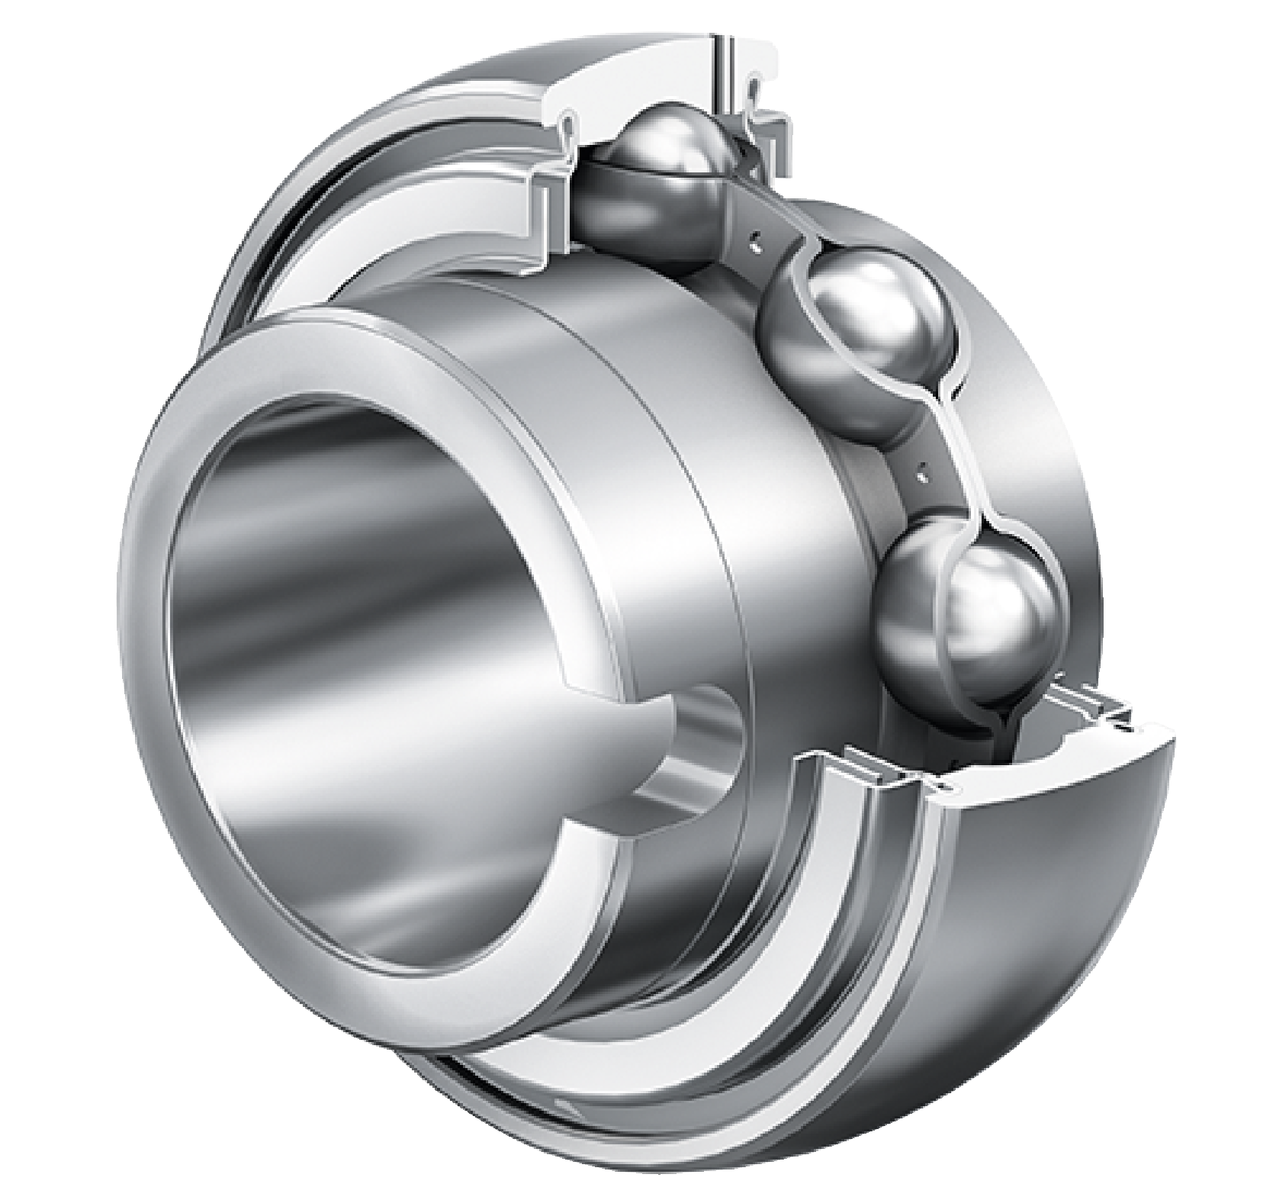 Radial Insert Ball Bearing GLE..-XL-KLL-B-FA164, Spherical Outer Ring, Drive-Slot in Inner Ring, L Seals on Both Sides, High Temperature